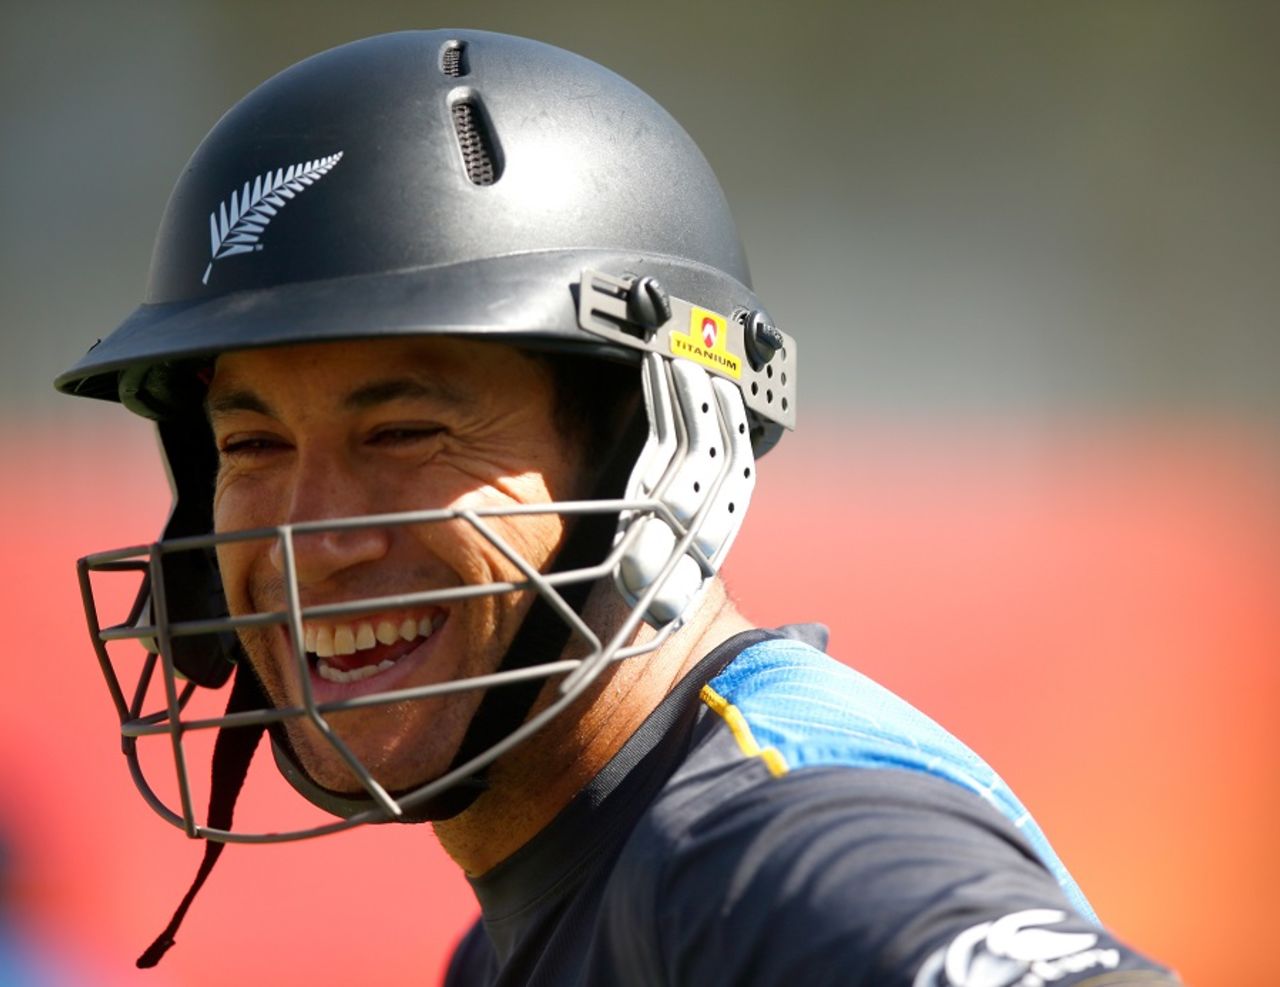 Ross Taylor looks relaxed during a training session, World Cup 2015, Auckland, February 25, 2015